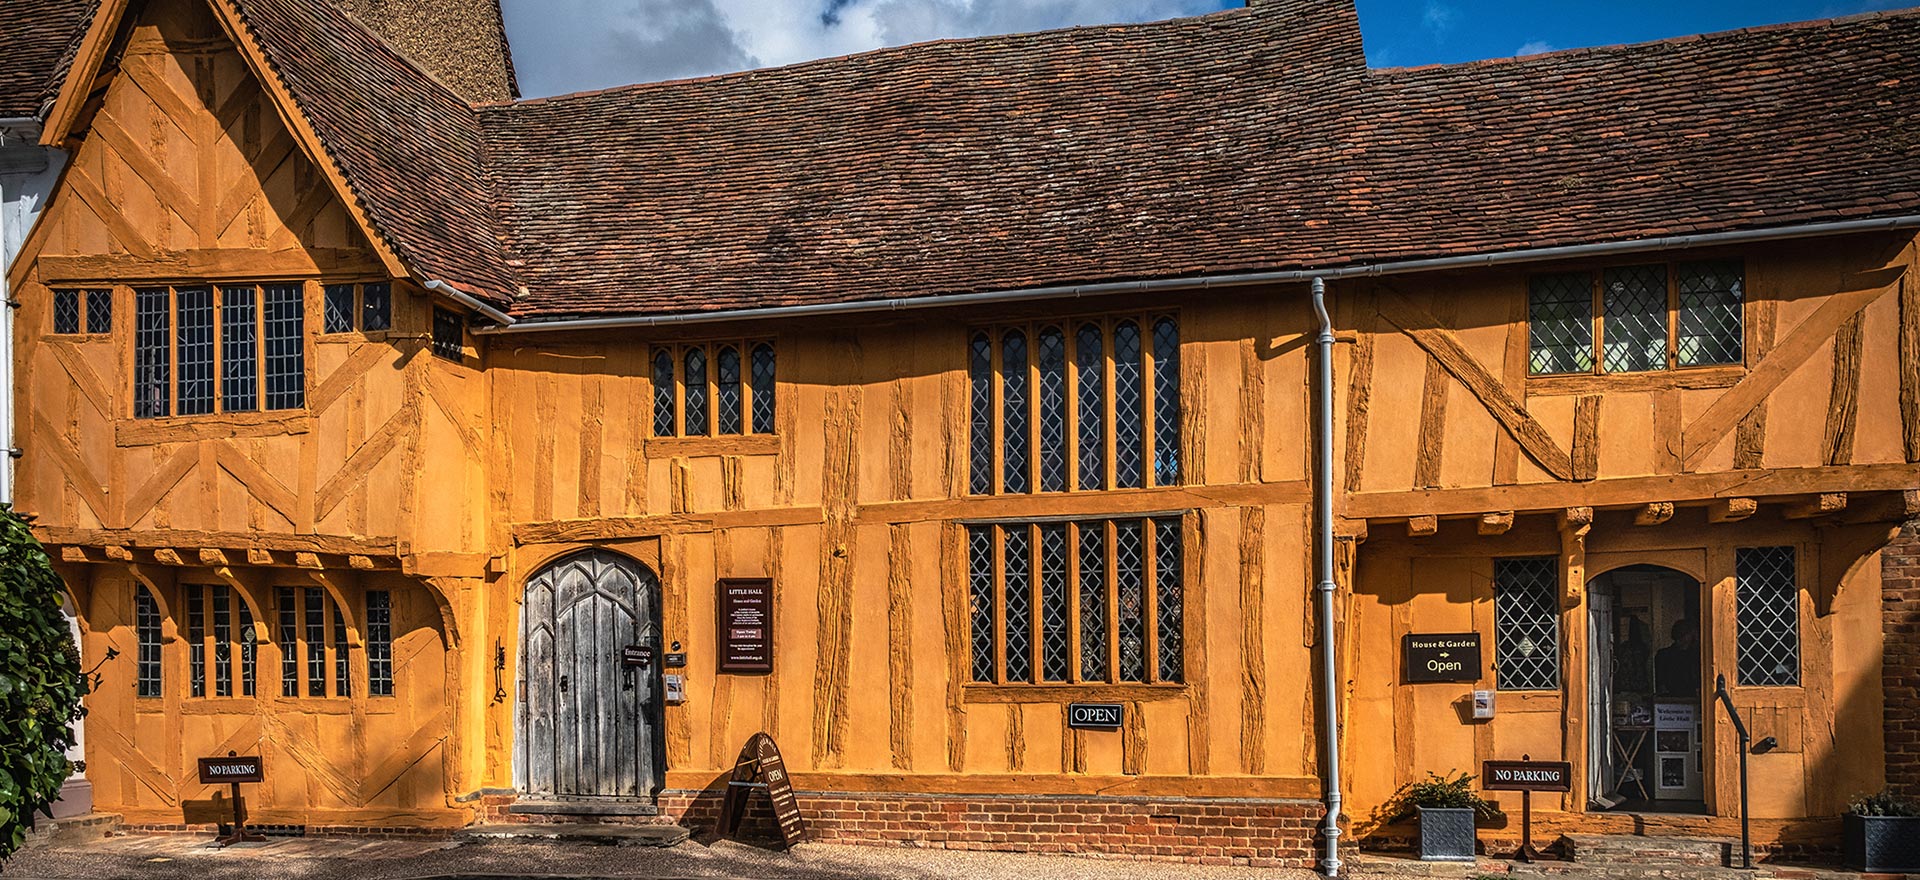 Lavenham, Places to Eat, See and Stay, Love Lavenham, Suffolk